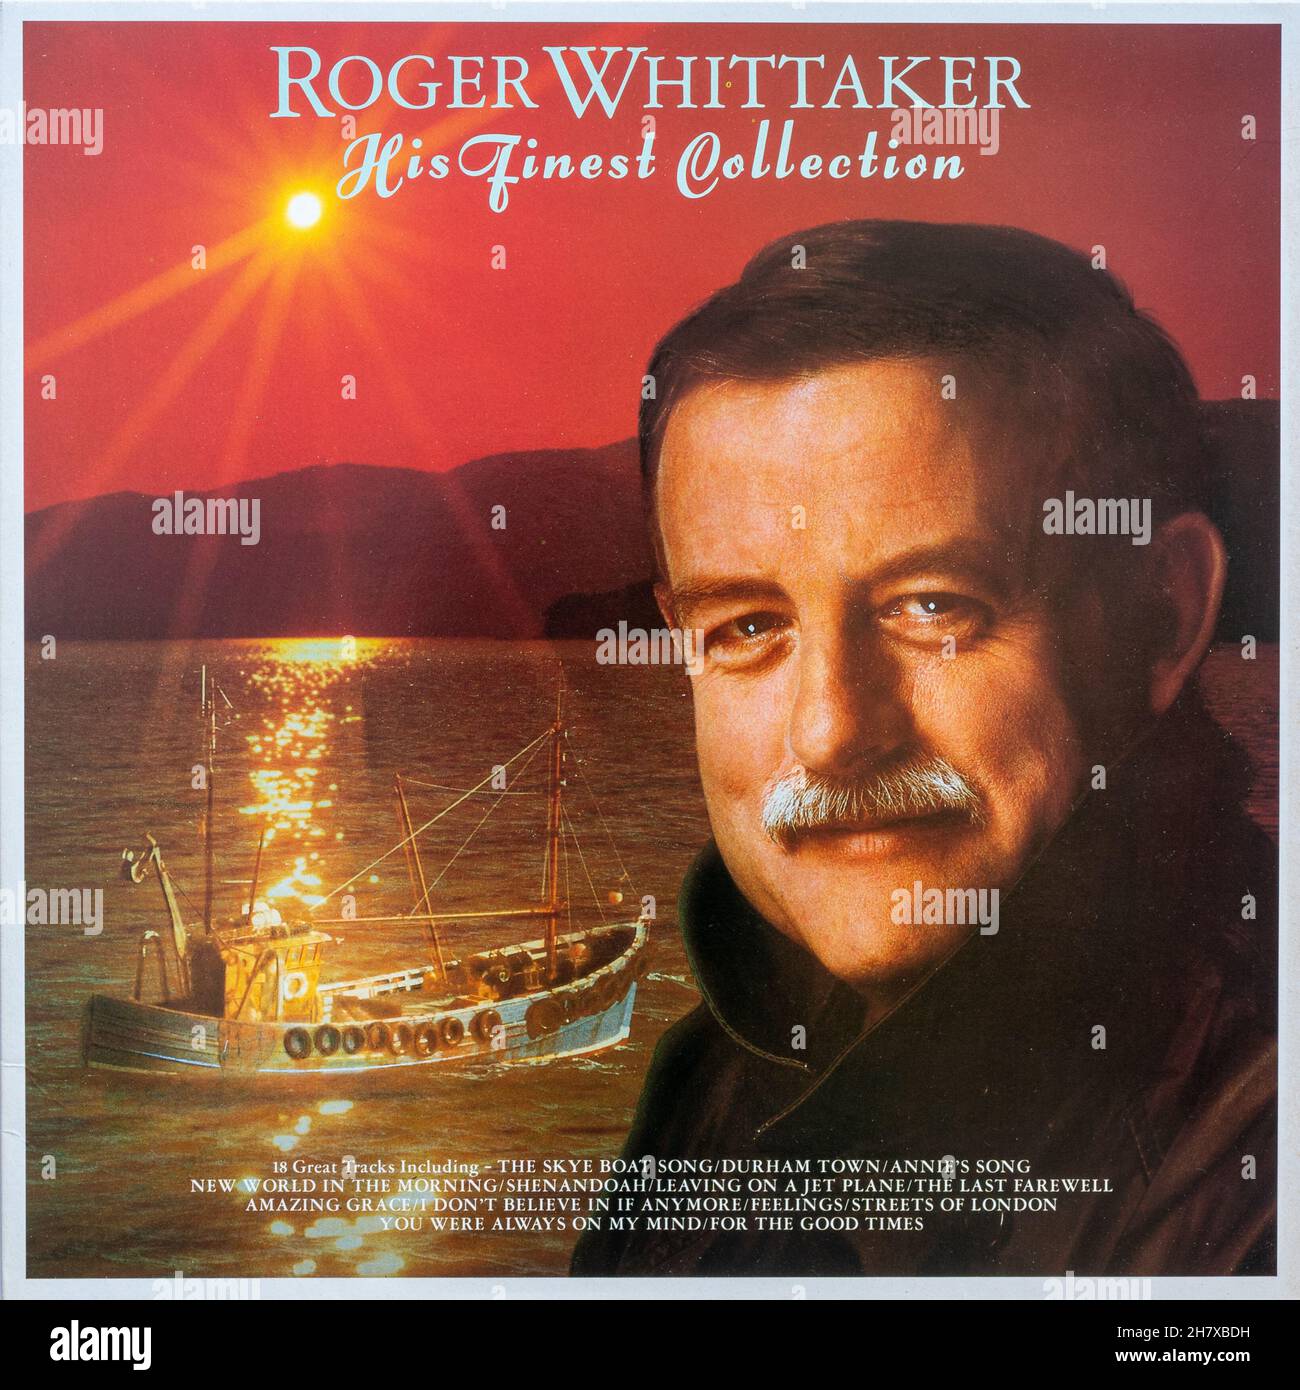 Roger Whittaker compilation album His Finest Collection, 1987 vinyl LP record cover Stock Photo